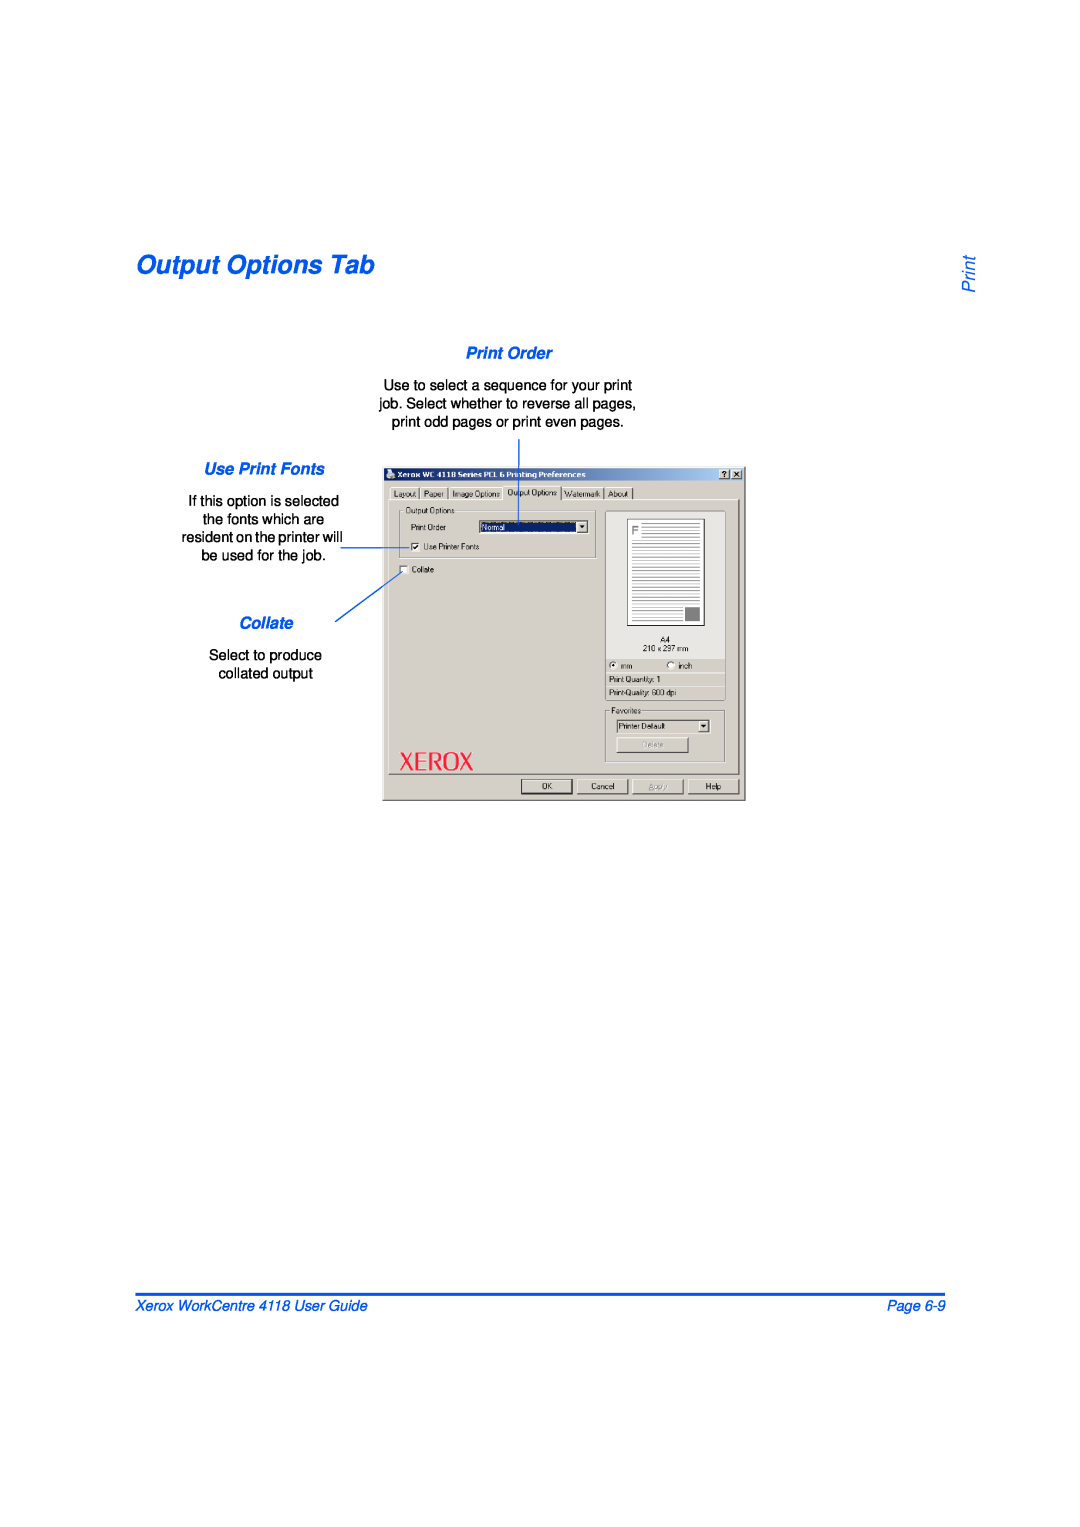 Xerox 32N00467 manual Output Options Tab, Print, If this option is selected, Select to produce collated output, Page 